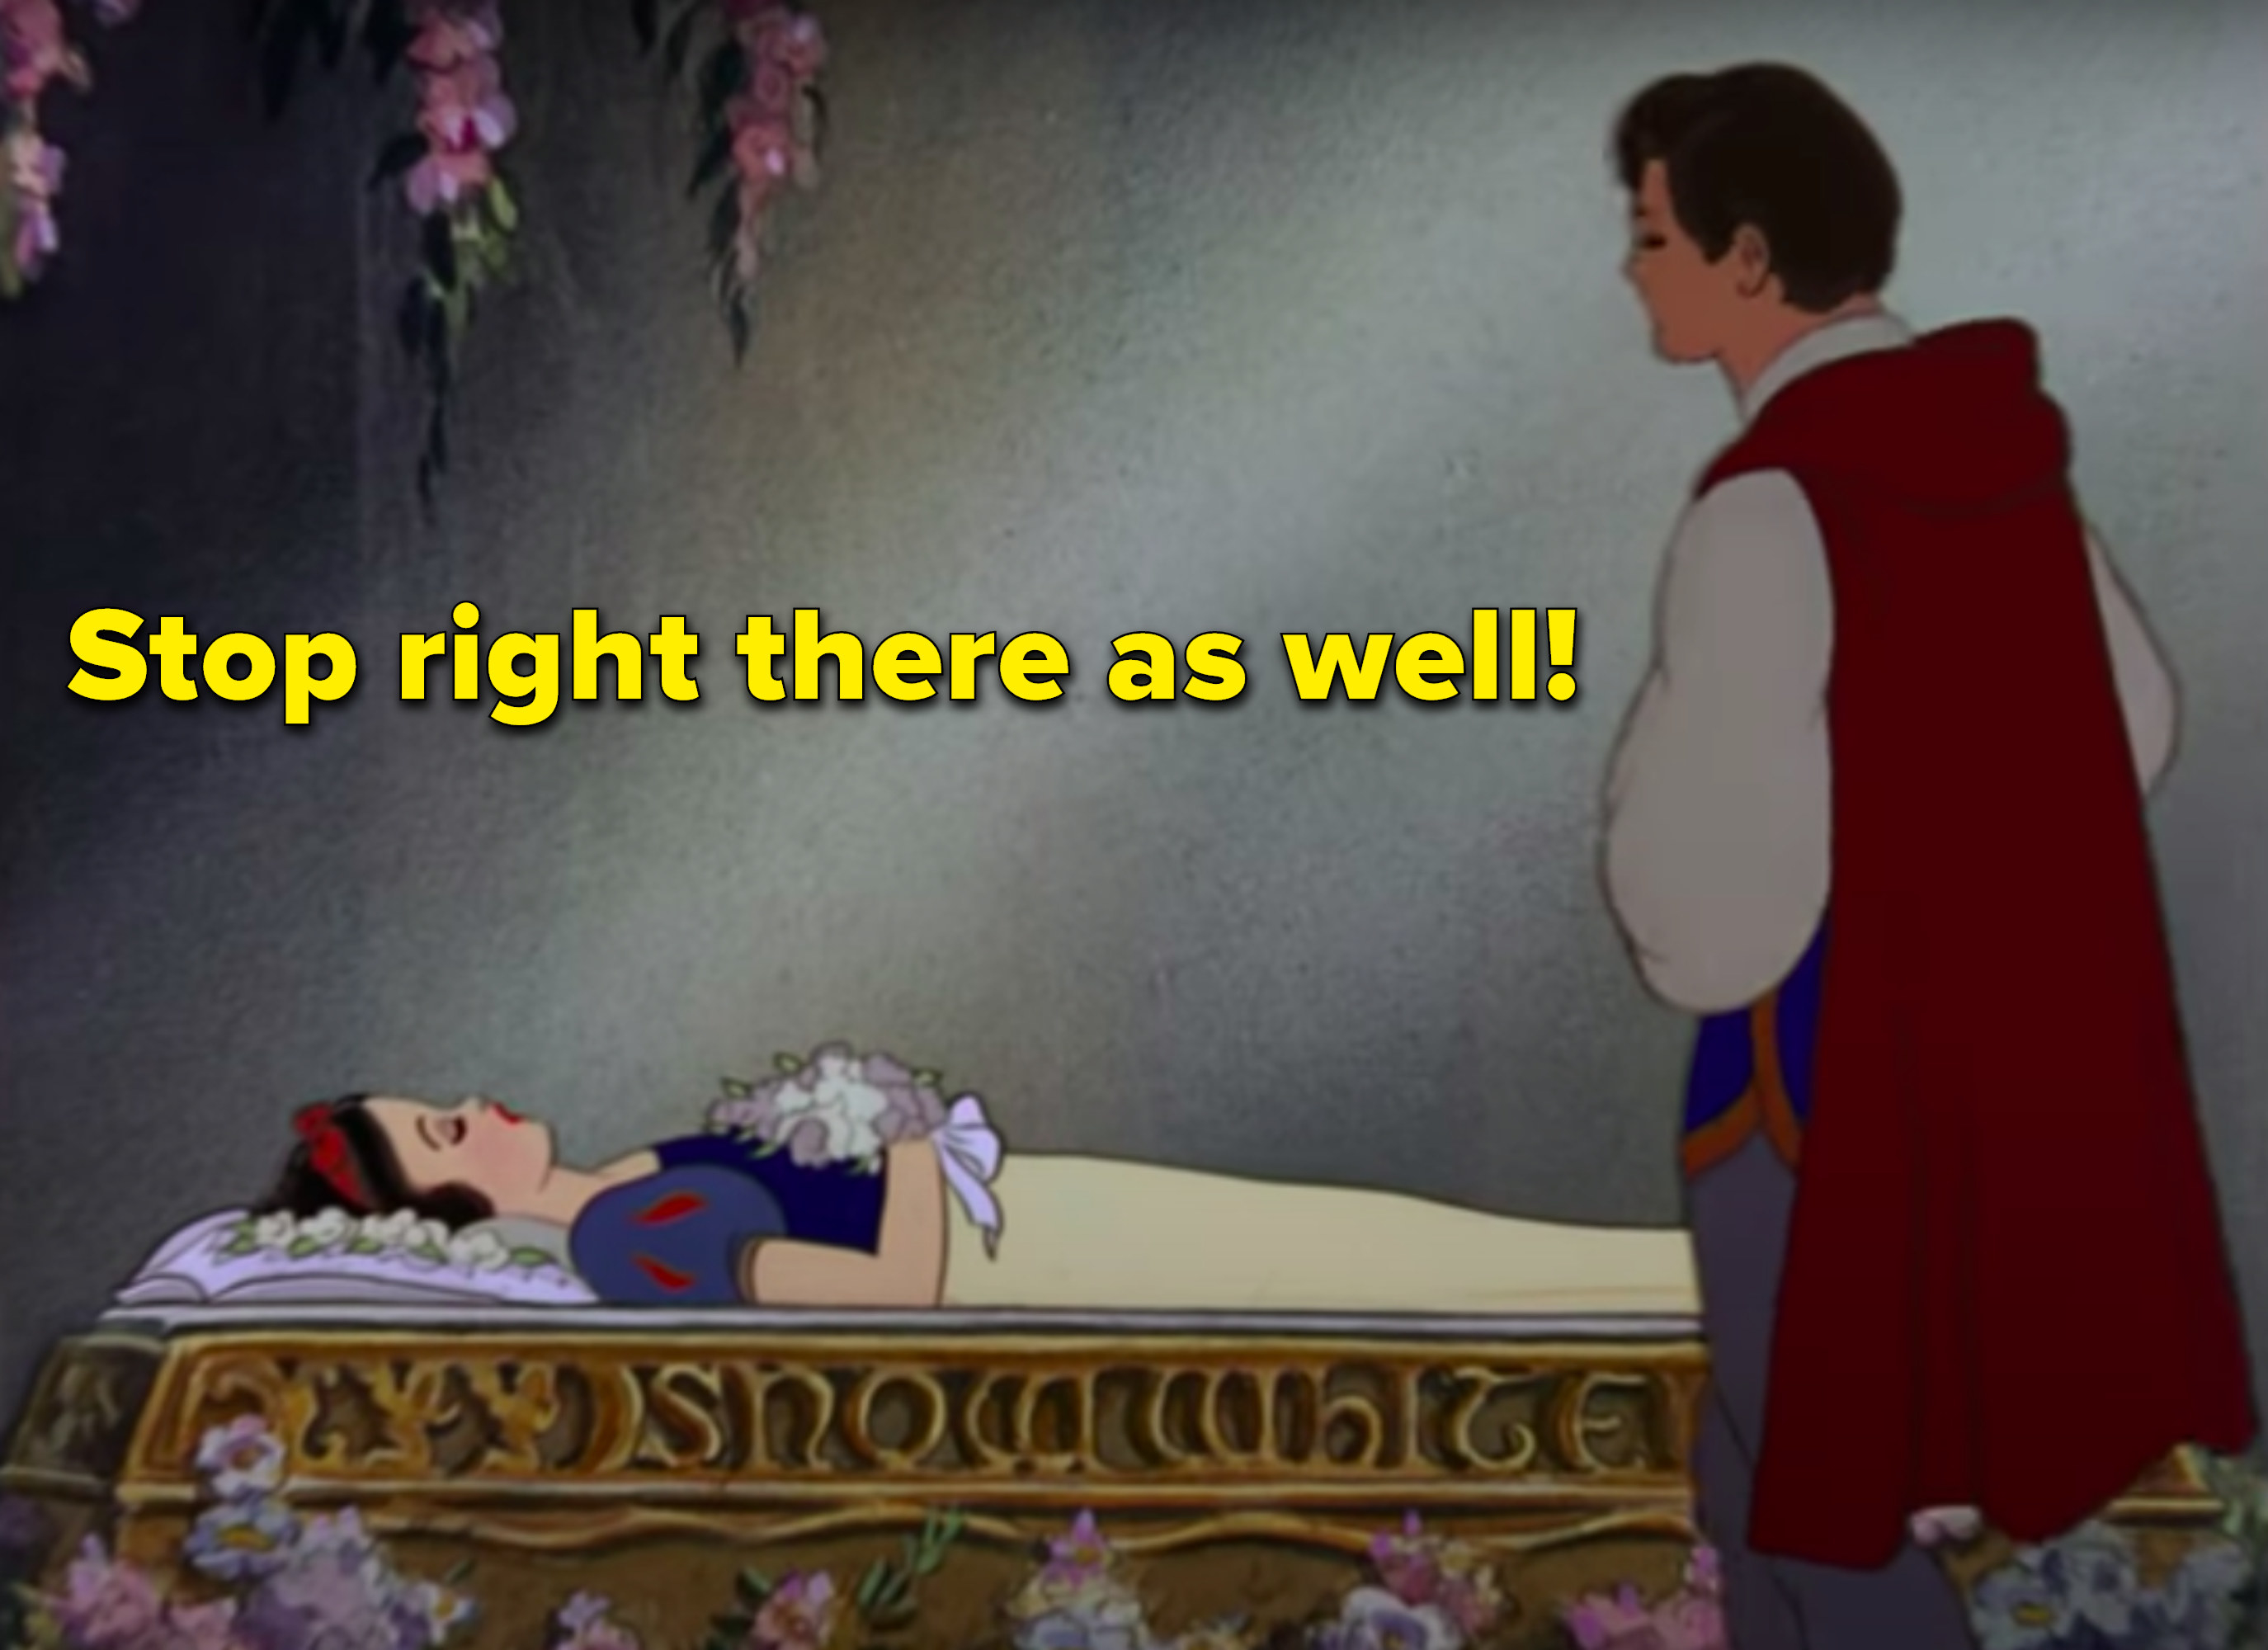 &quot;Stop right there as well&quot; written next to the Prince standing near Snow White 